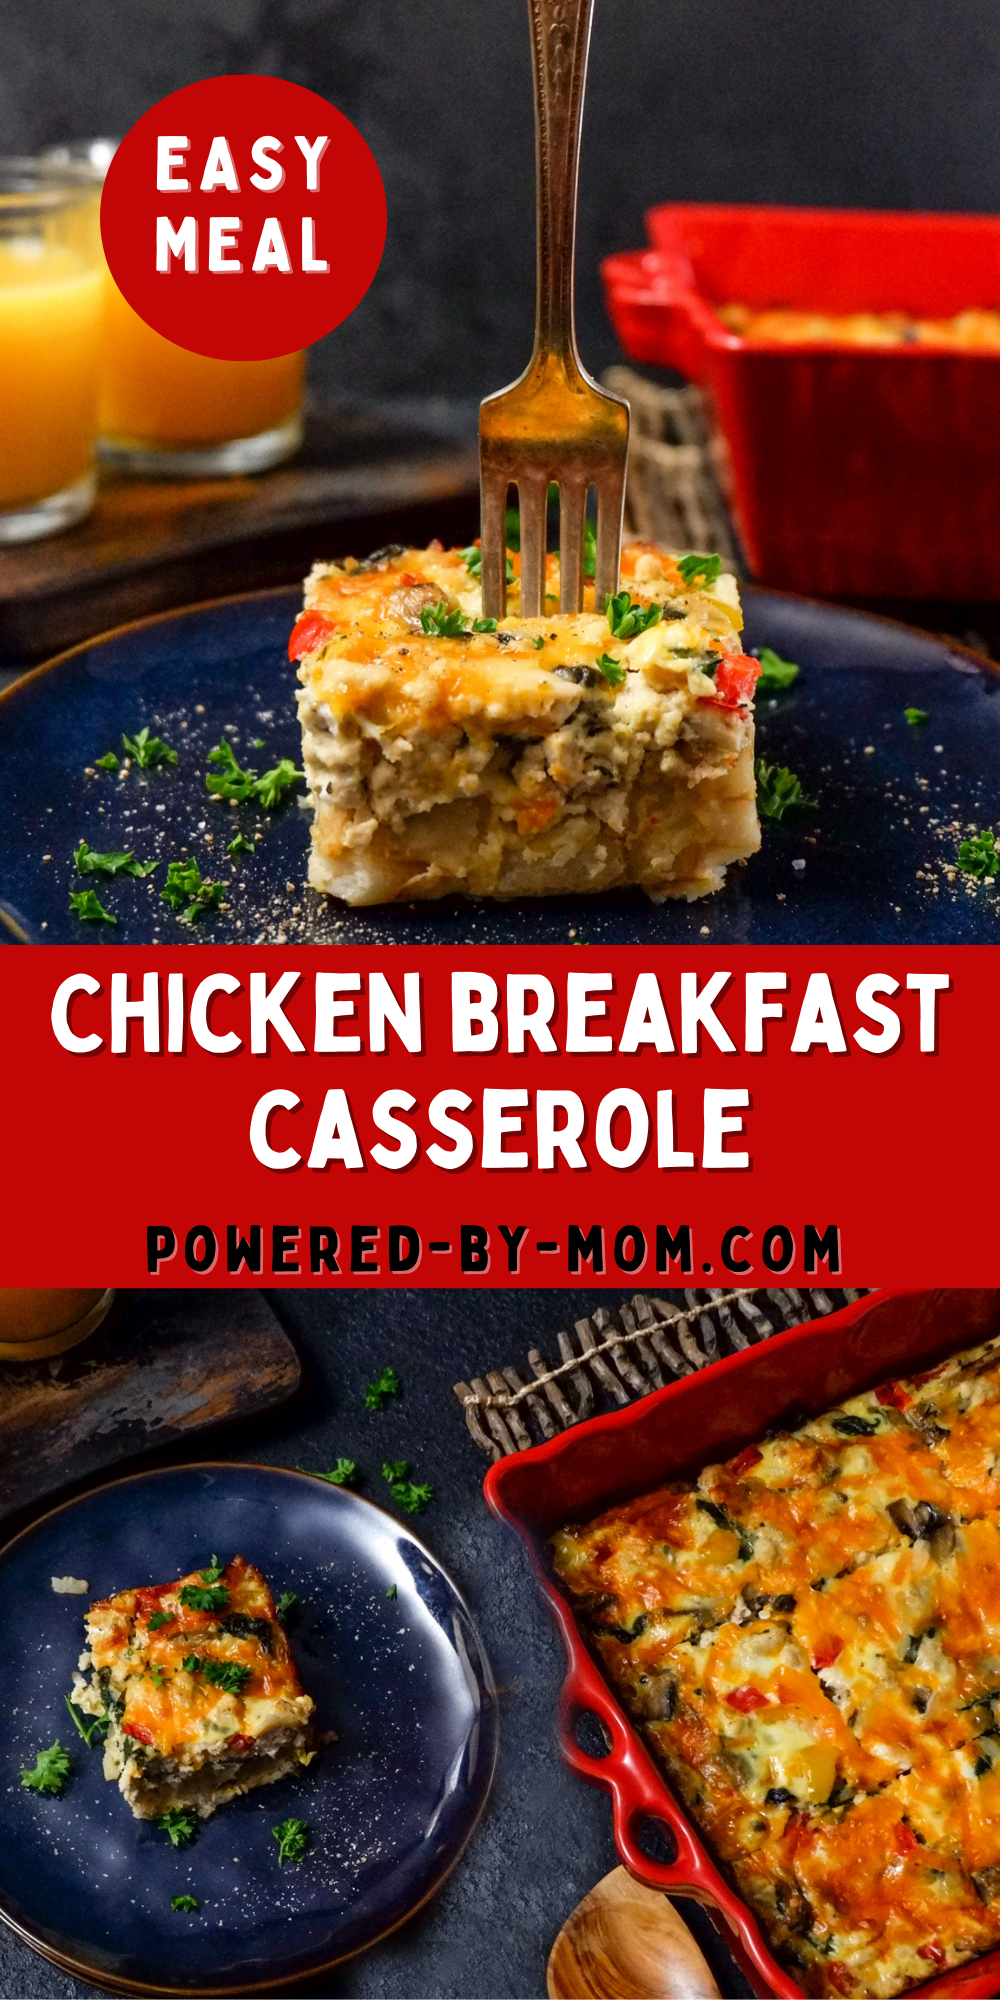 Chicken for breakfast? Heck yes! This easy Chicken Breakfast Casserole is a hearty meal with ground chicken, creamy egg base, diced hashbrowns, bacon, cheese and veggies. It's the perfect breakfast casserole any day. You can prep in no time and just put it in the oven when you're ready to bake it!